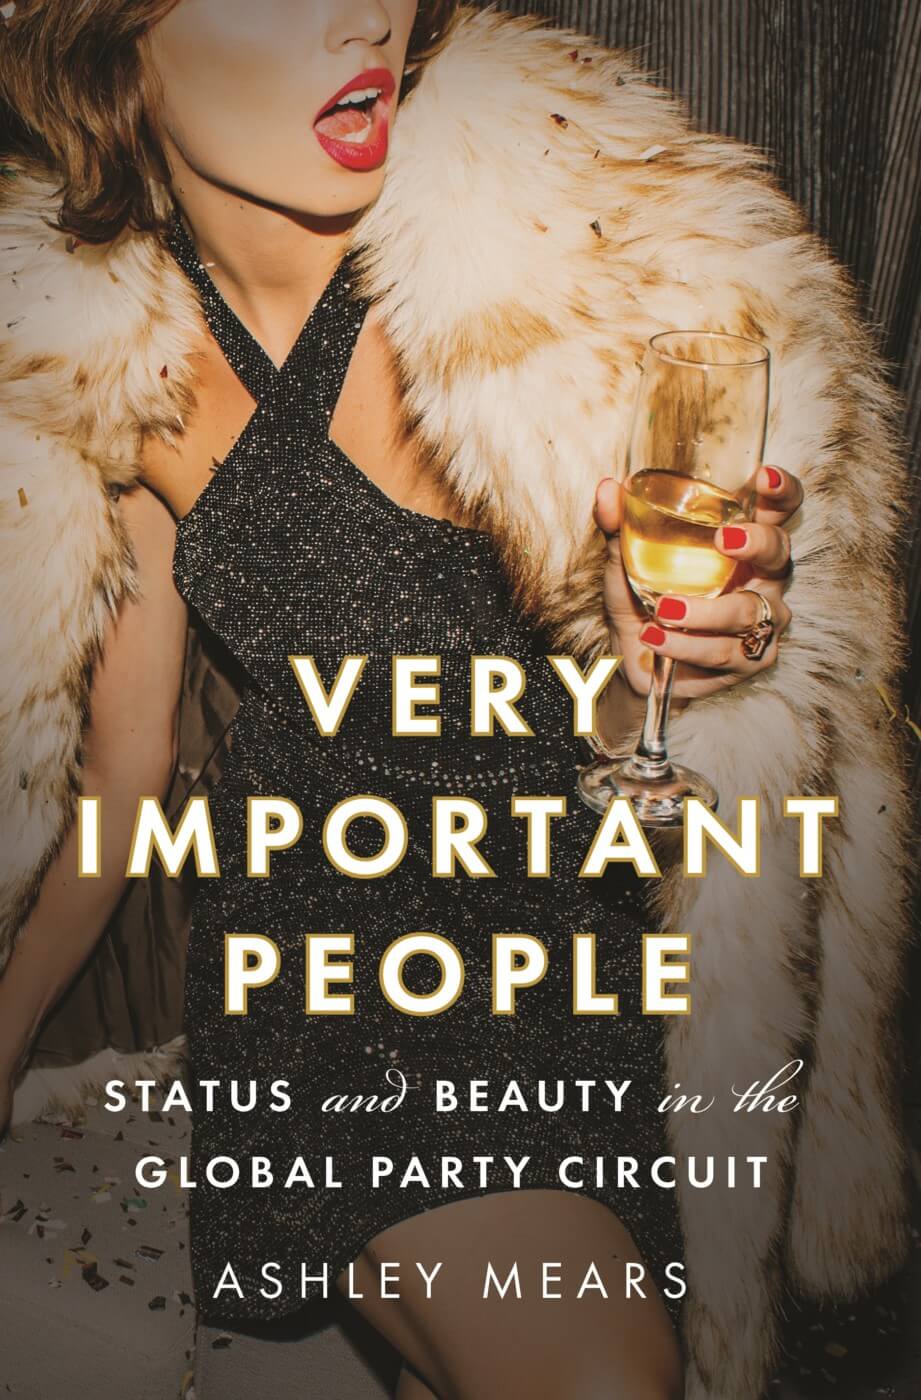 Very Important People by Ashley Mears